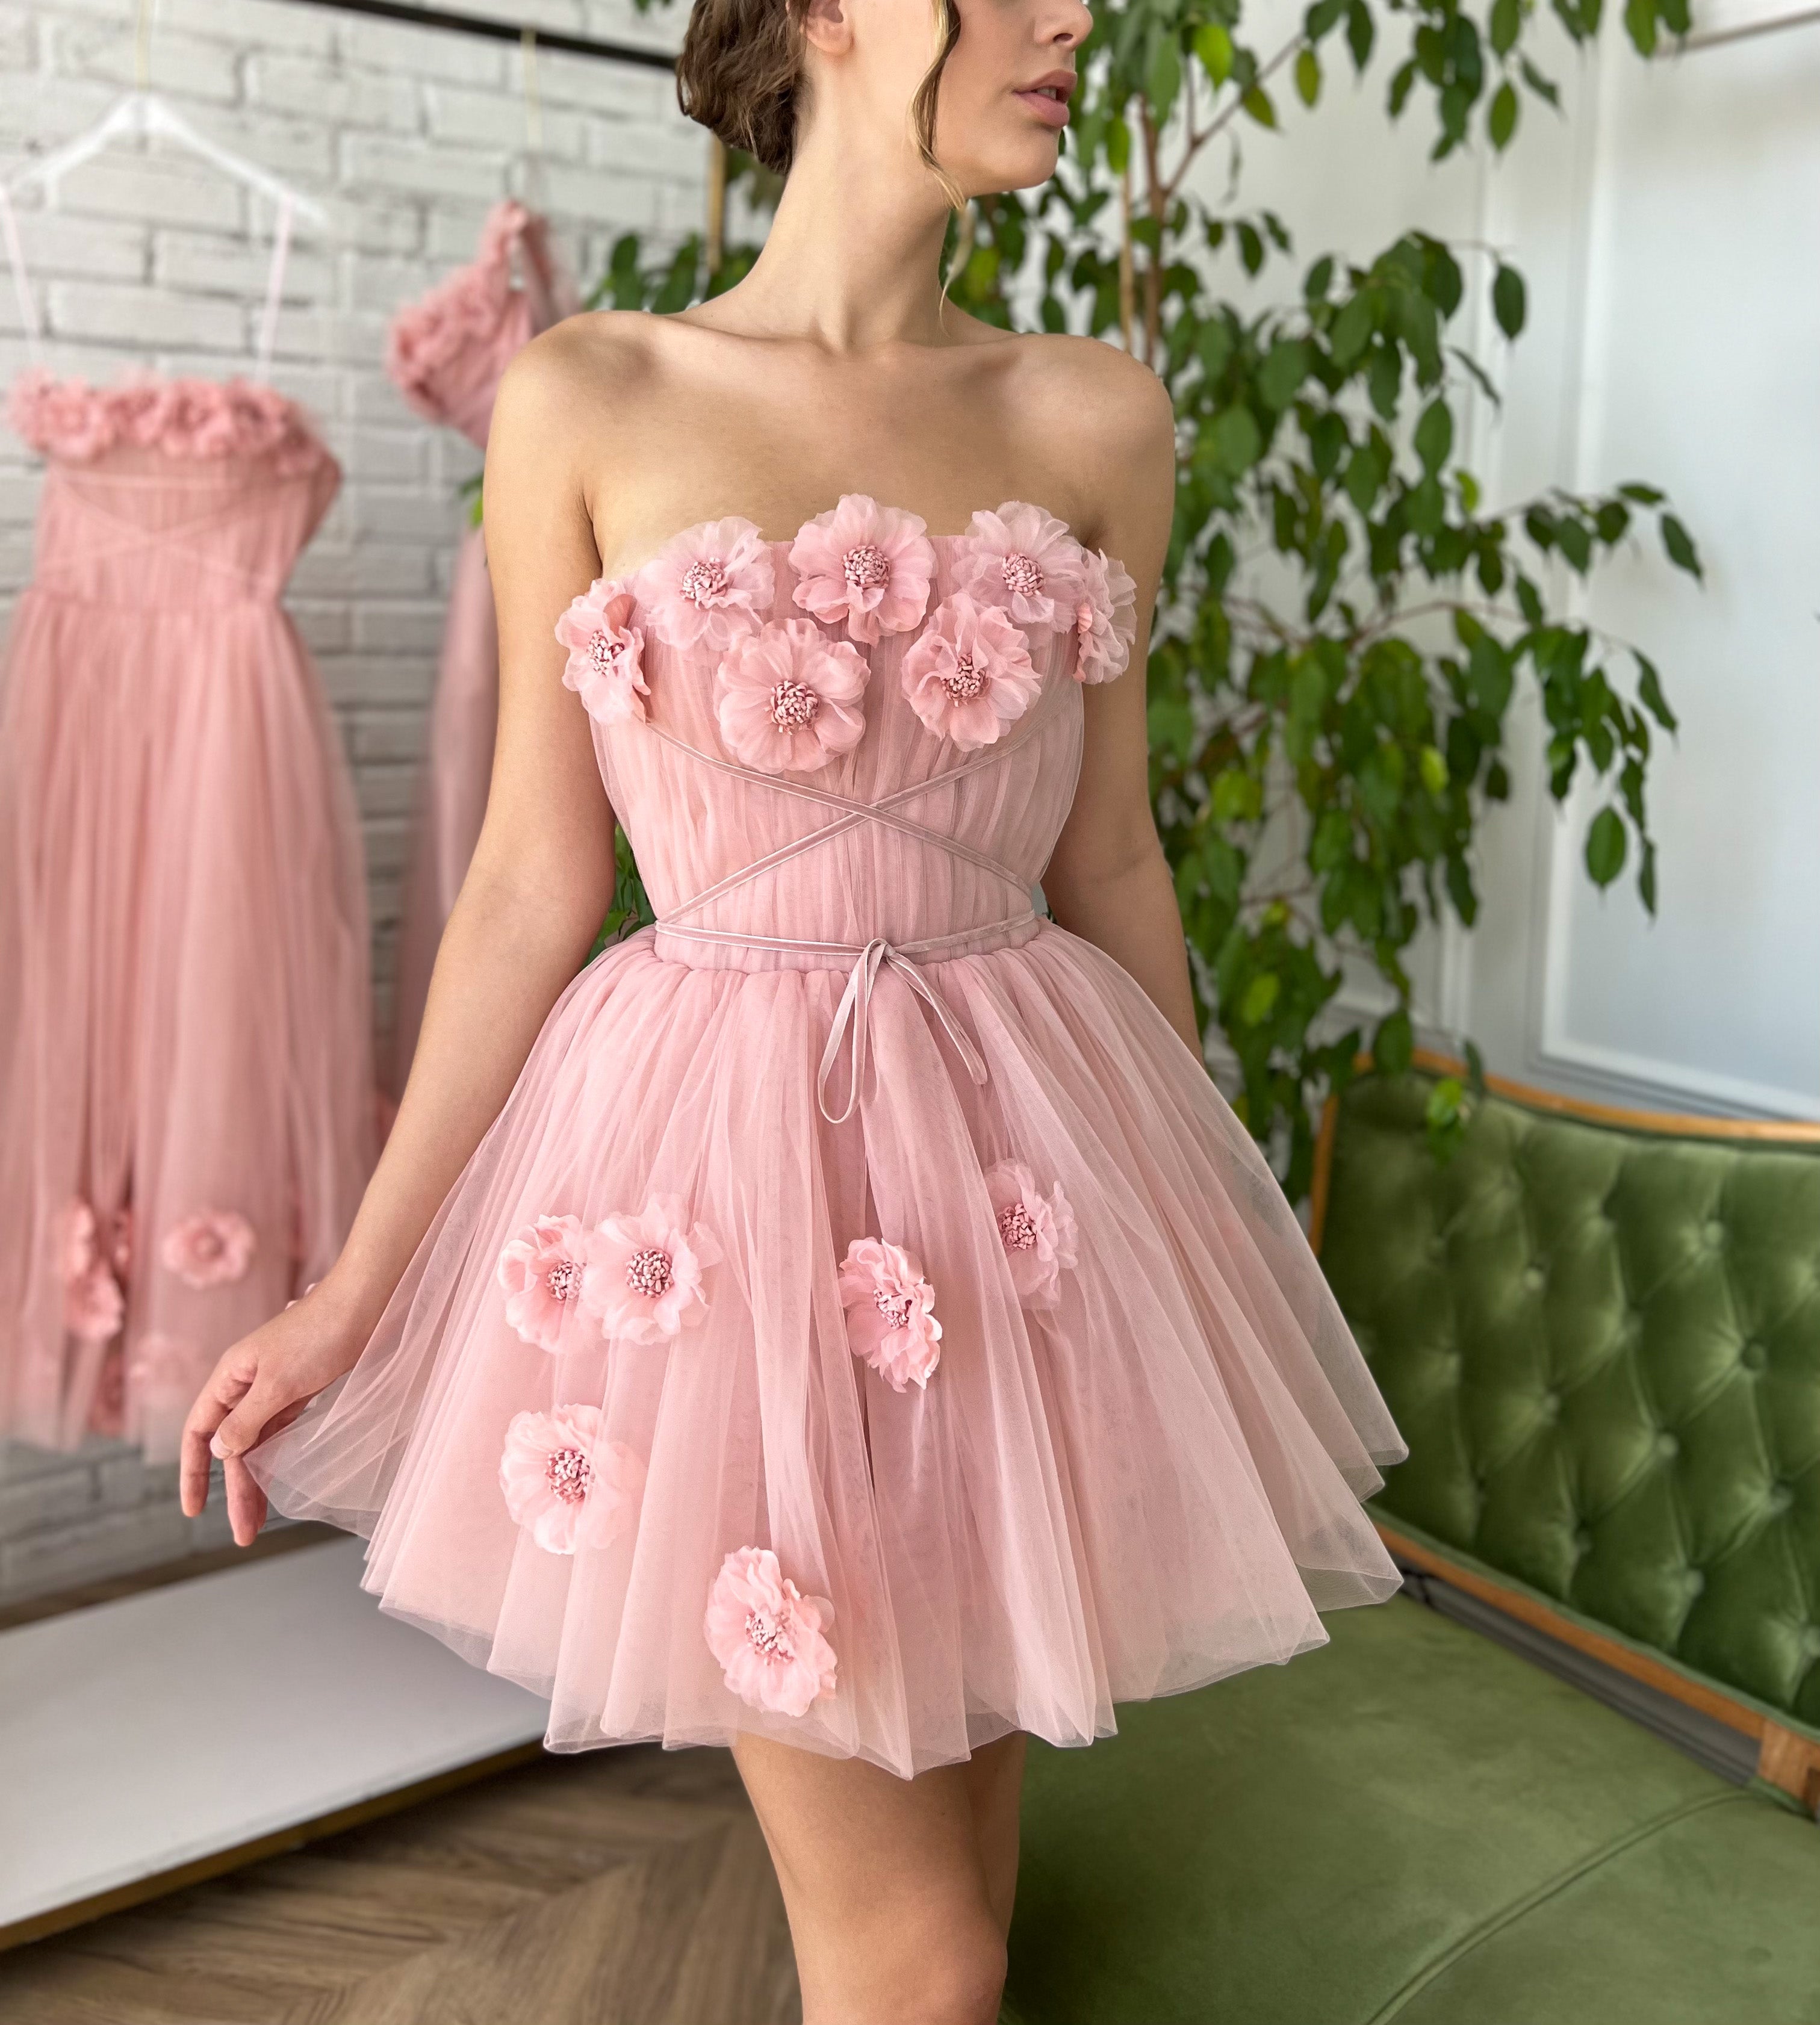 Pink mini dress with no sleeves, embroidery and flowers